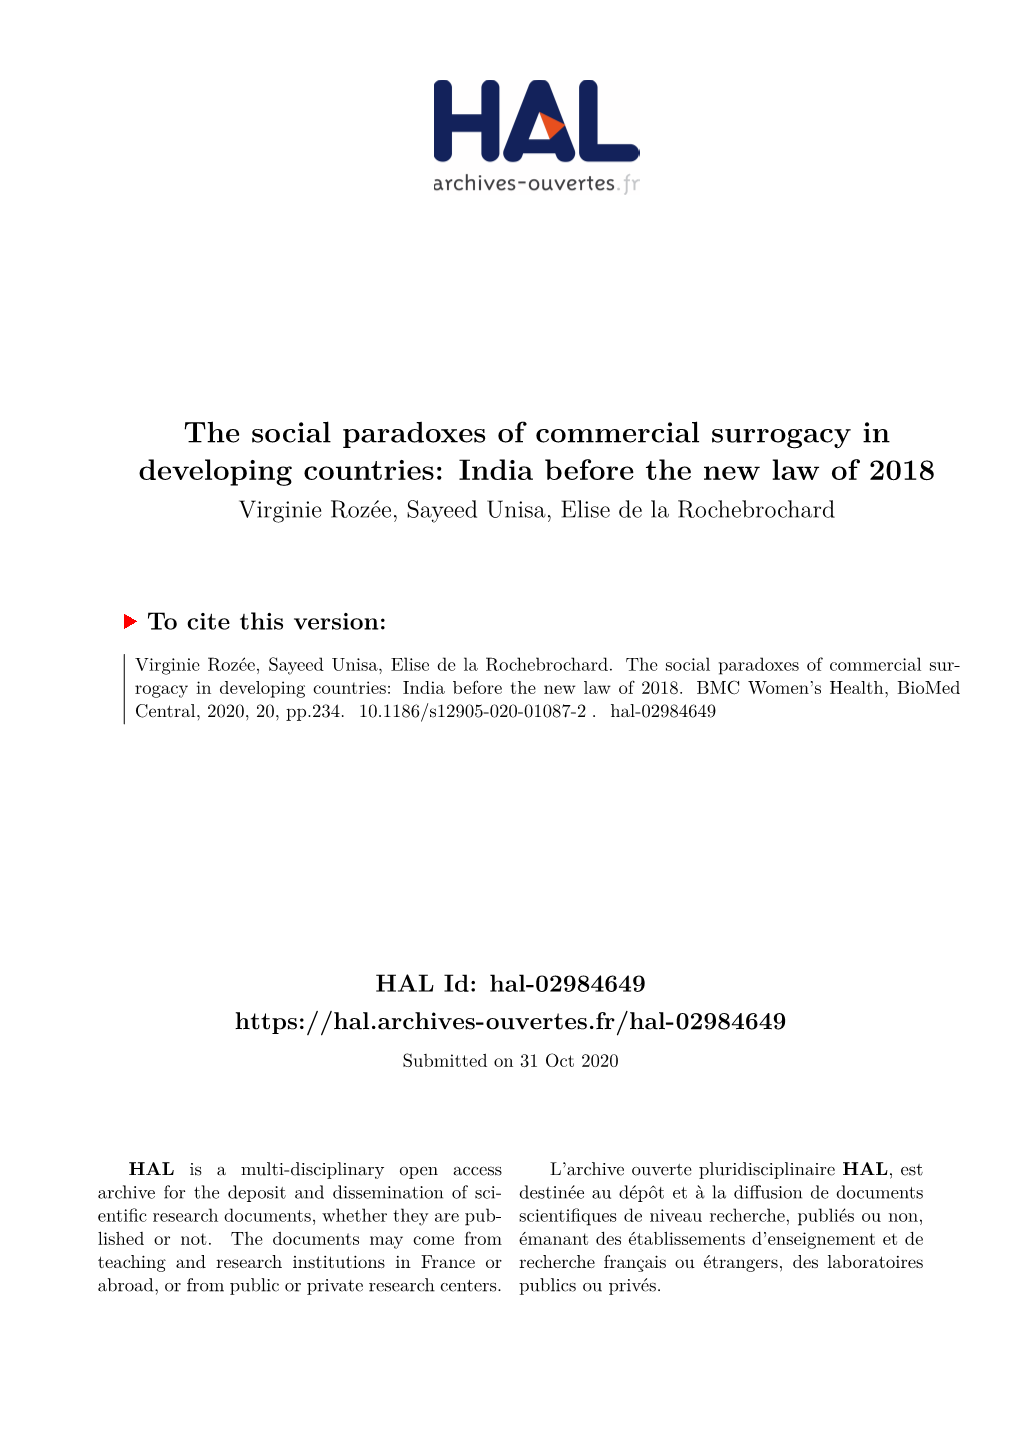 The Social Paradoxes of Commercial Surrogacy in Developing Countries: India Before the New Law of 2018 Virginie Rozée, Sayeed Unisa, Elise De La Rochebrochard